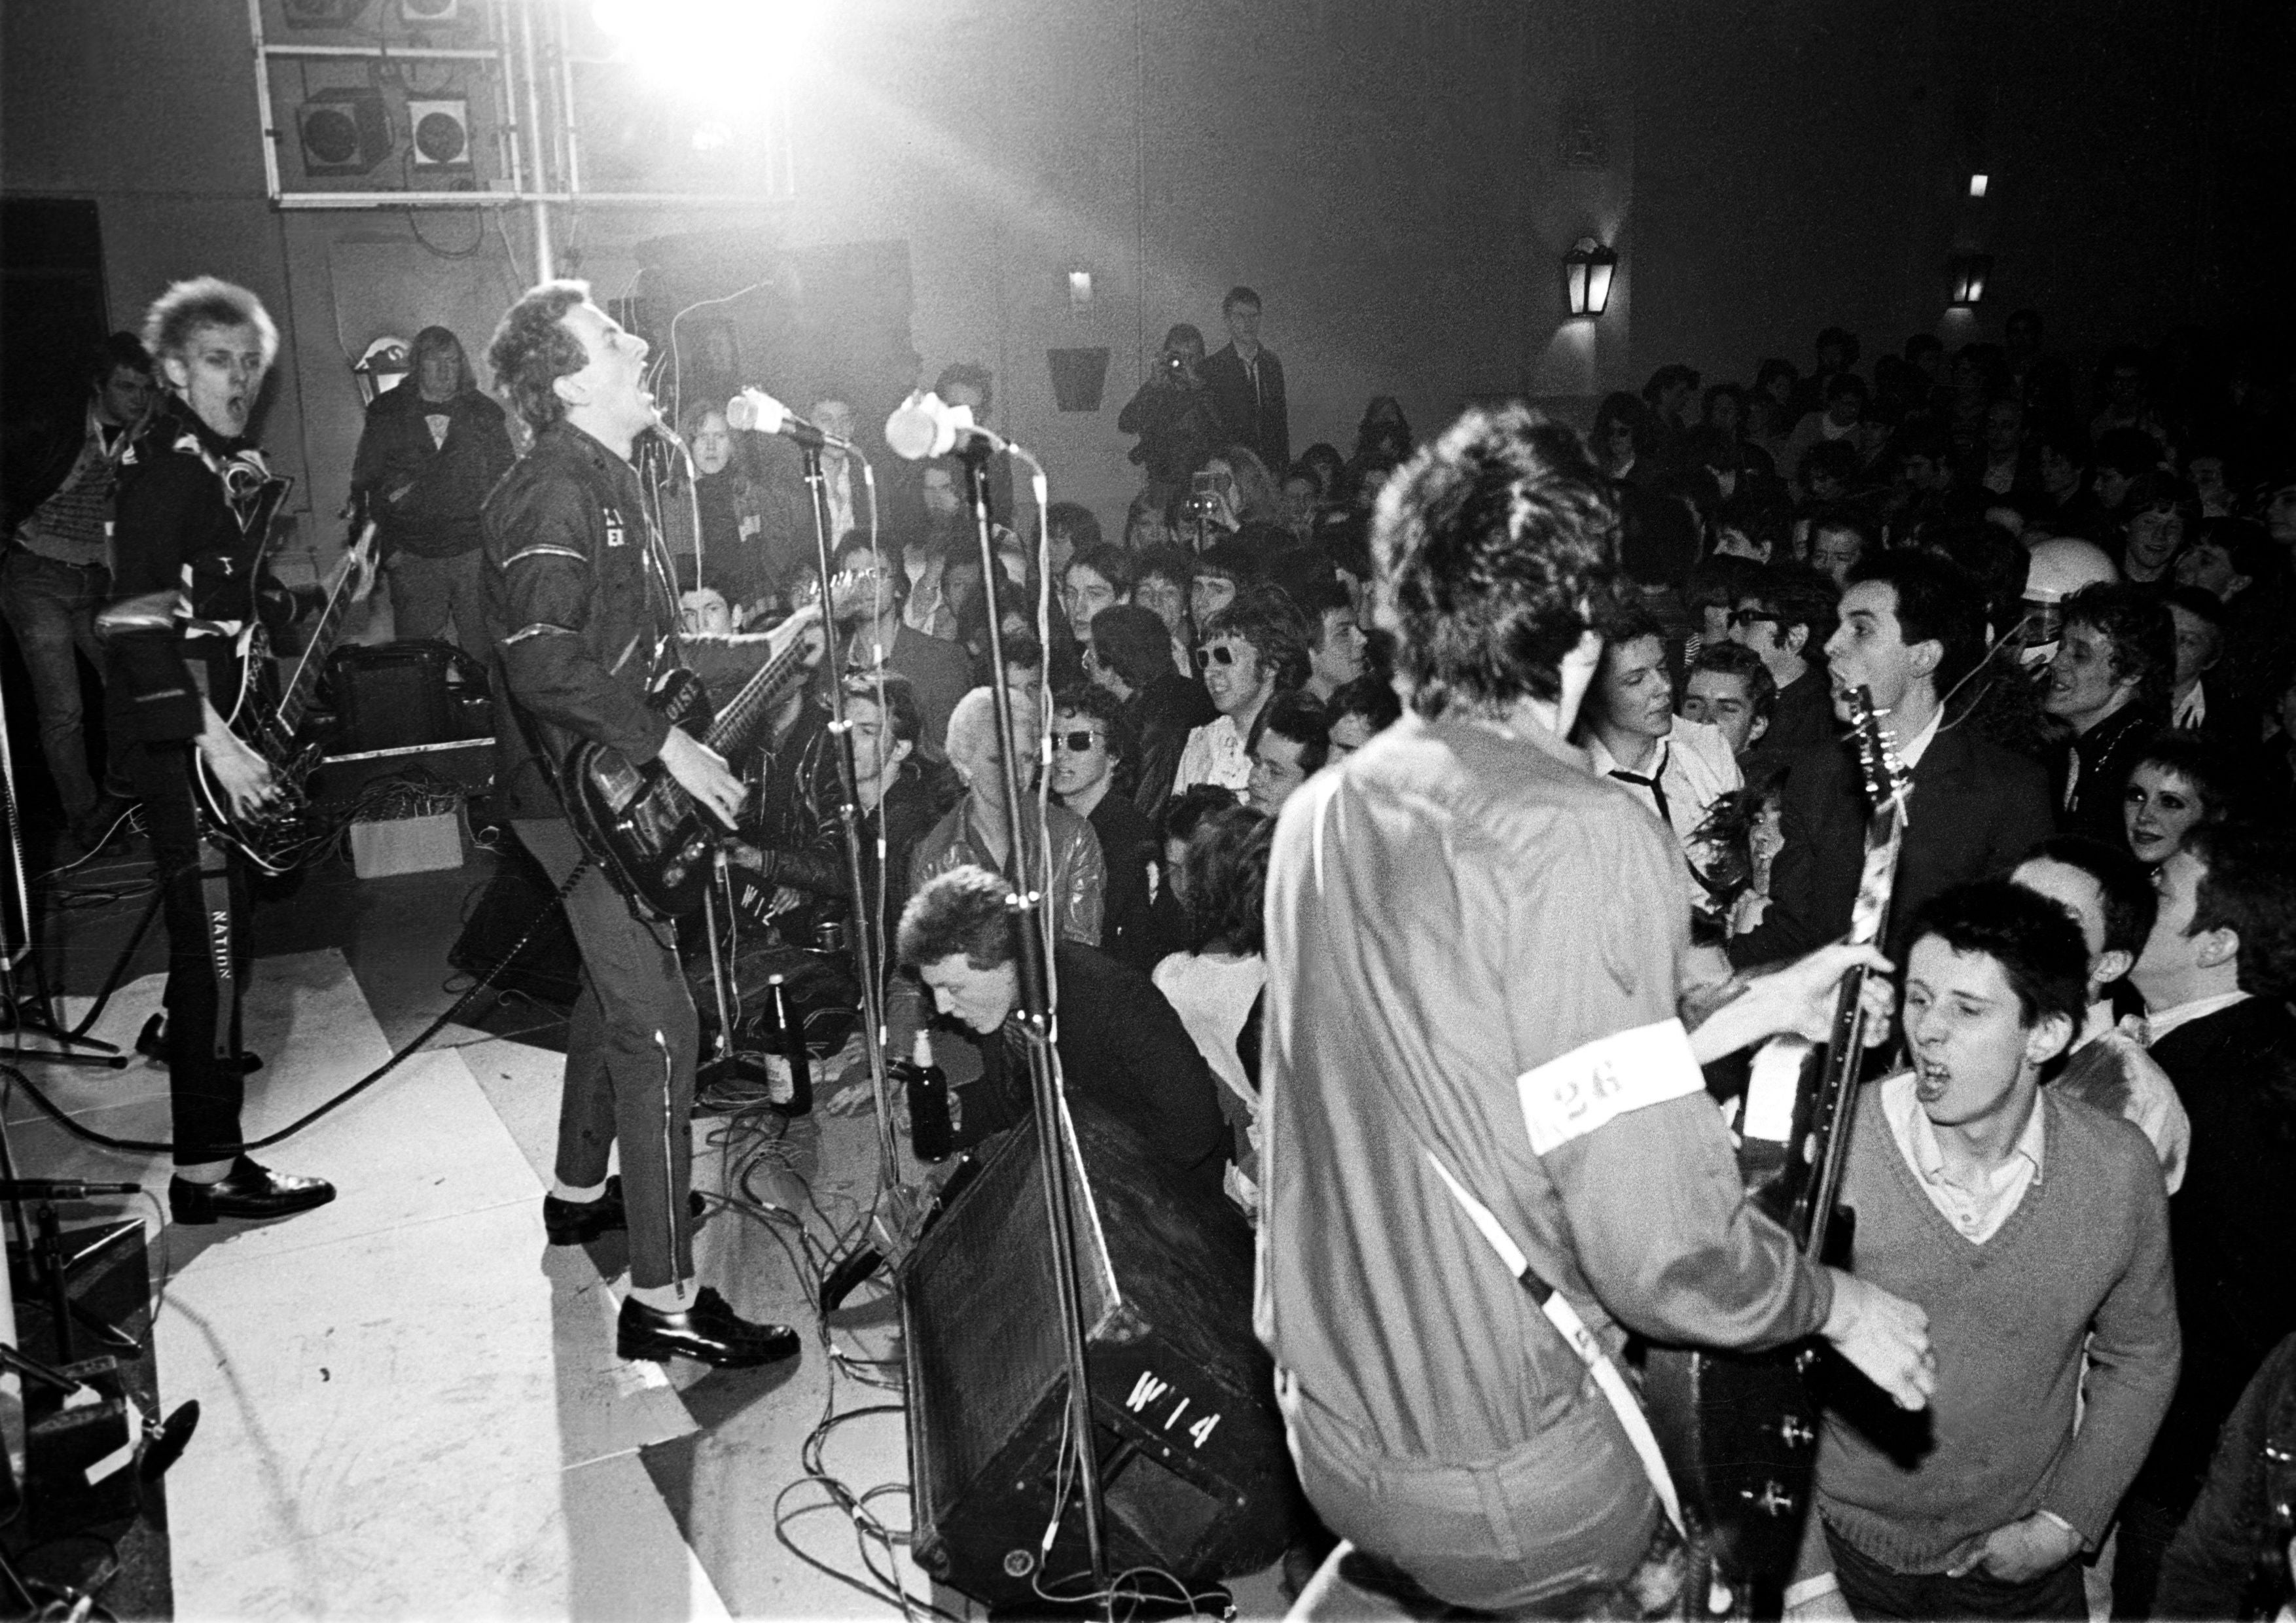 The Clash with Shane MacGowan (right) in the audience